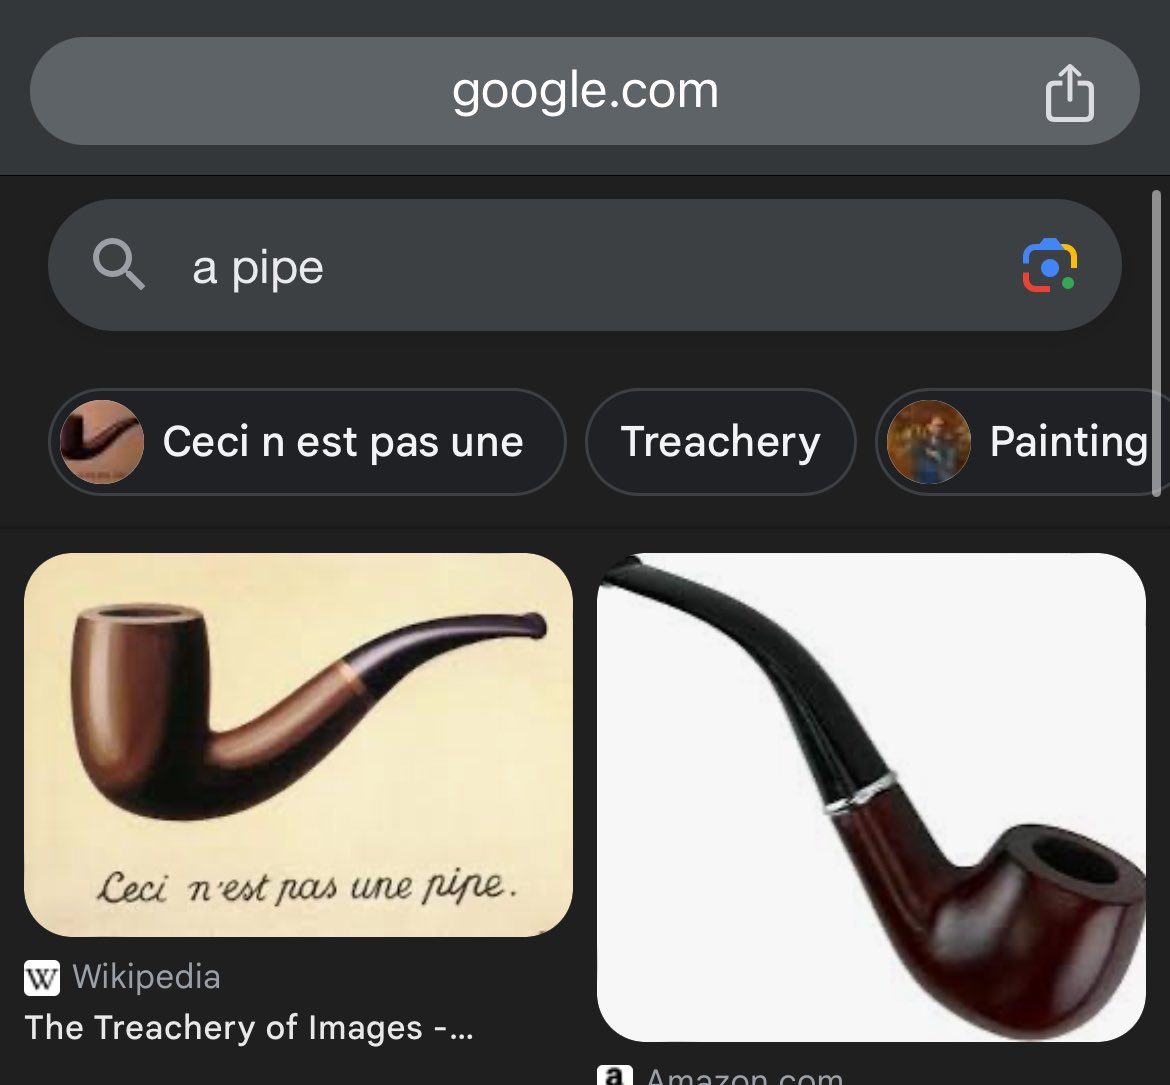 Google is so broken that the first image it gave me for a pipe is something that is not a pipe 🙄